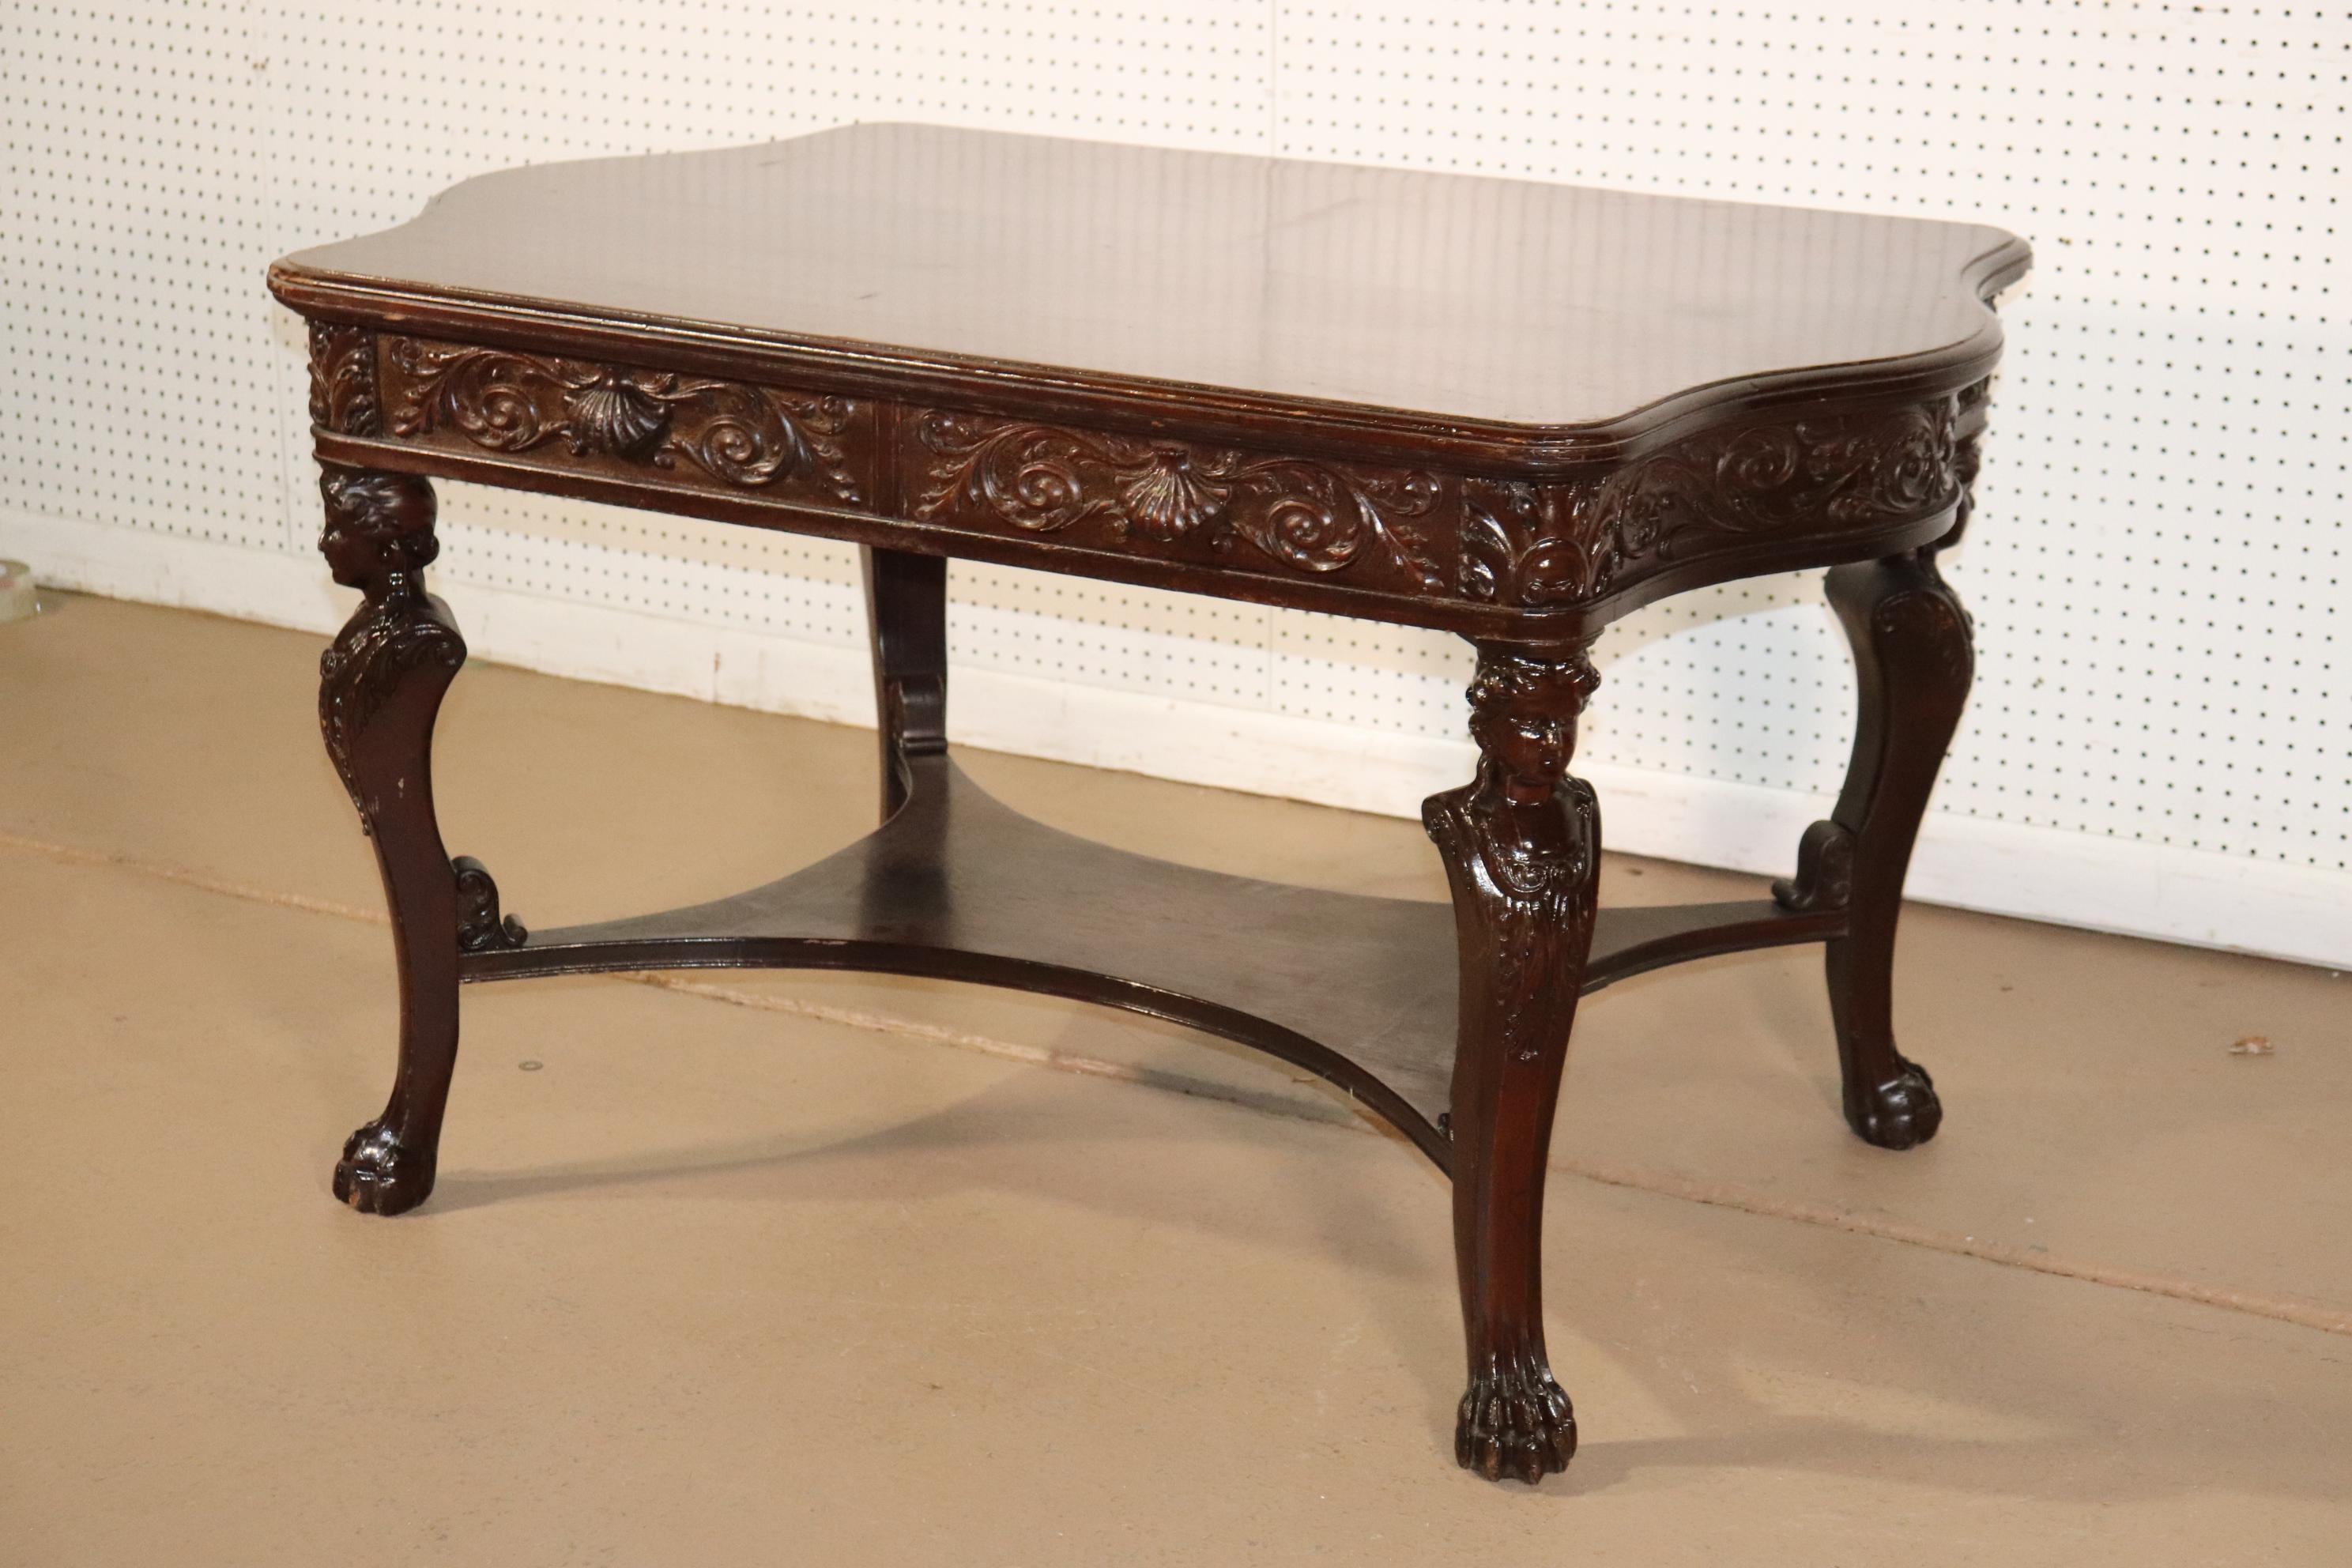 RJ Horner Style Carved Maiden Figural Mahogany Partners Desk Writing Table In Good Condition For Sale In Swedesboro, NJ